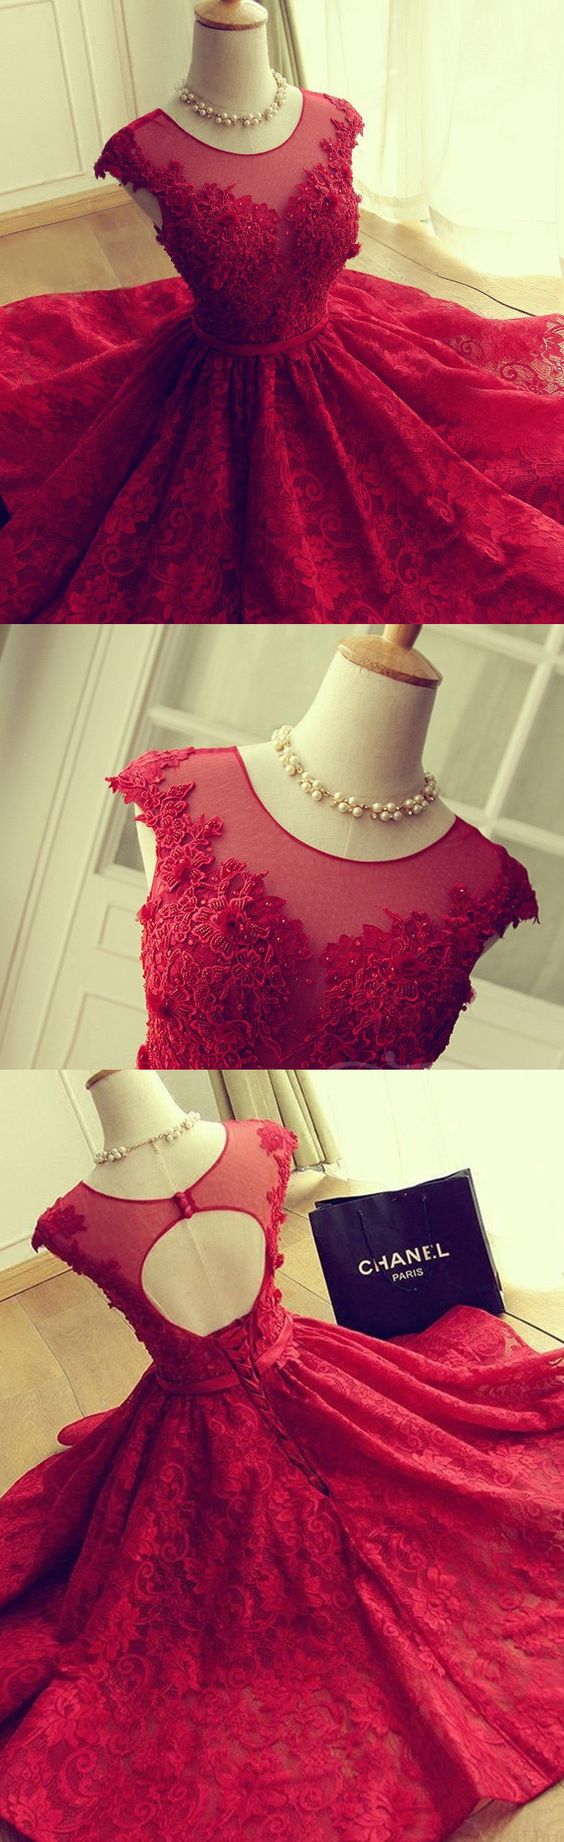 Red Party Dresses, Short Prom Dresses,appliques Ball Gowns Dress Lace ...